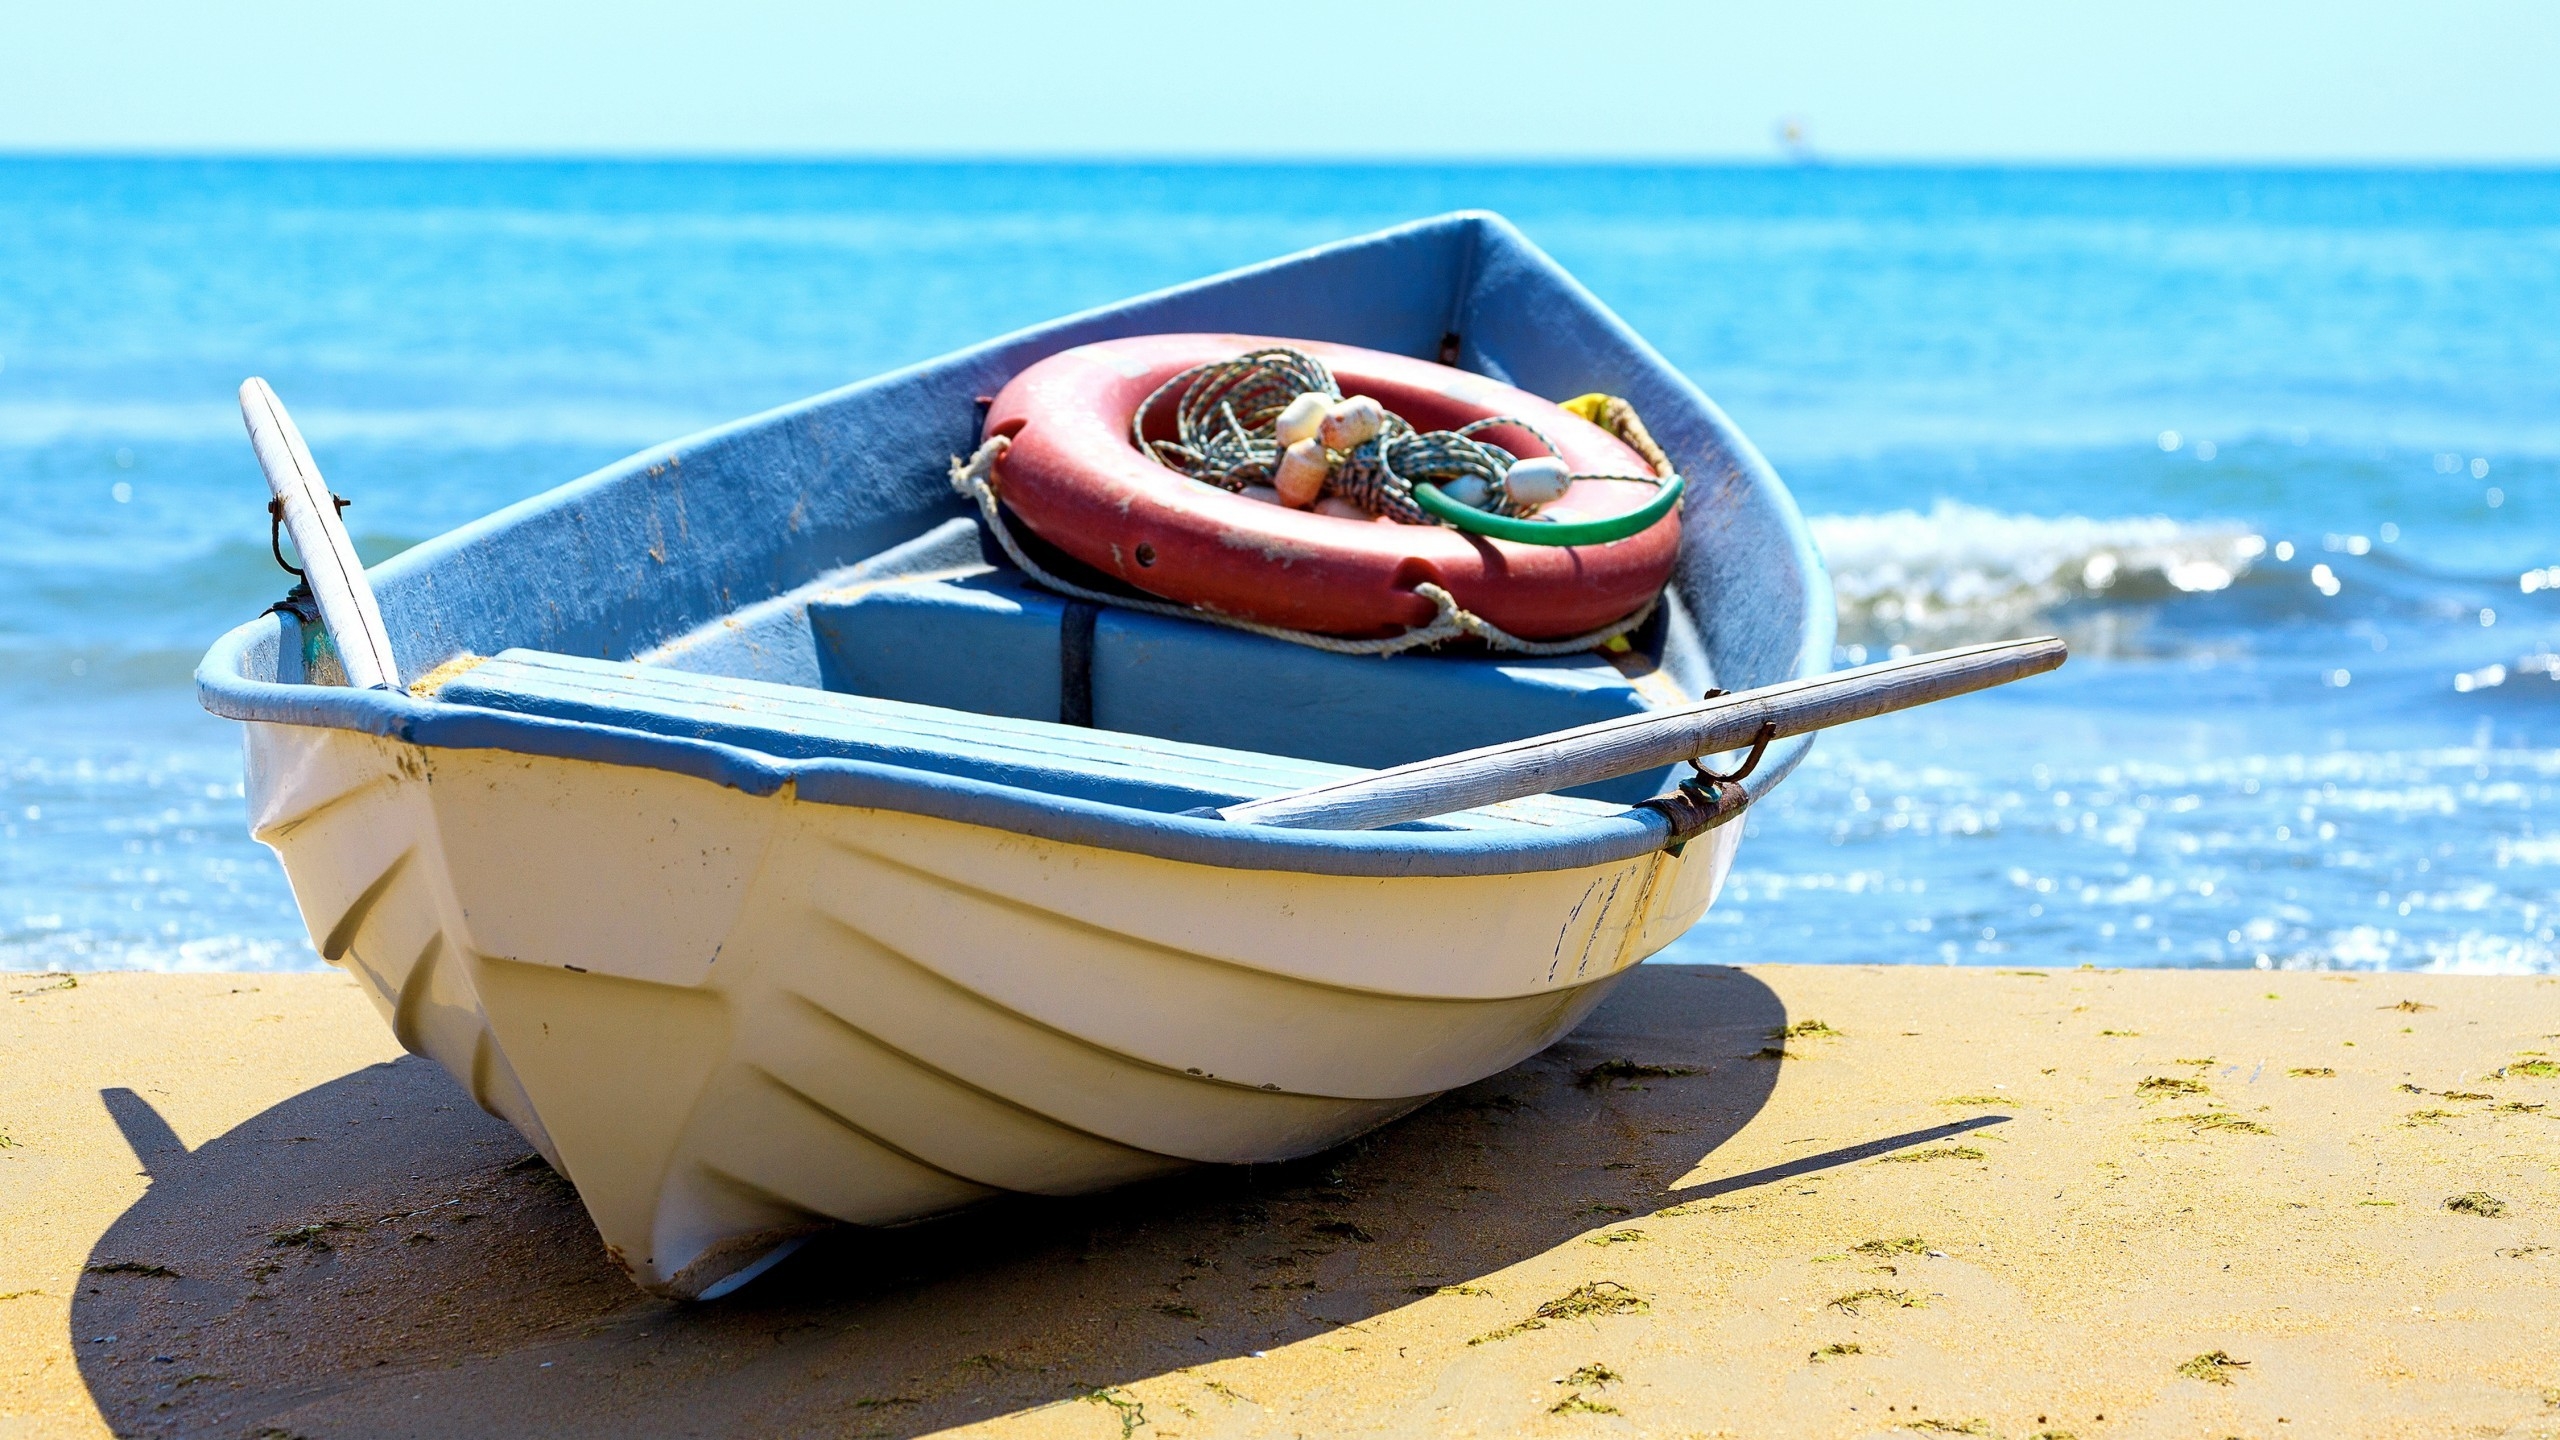 Old Boat on the Beach for 2560x1440 HDTV resolution